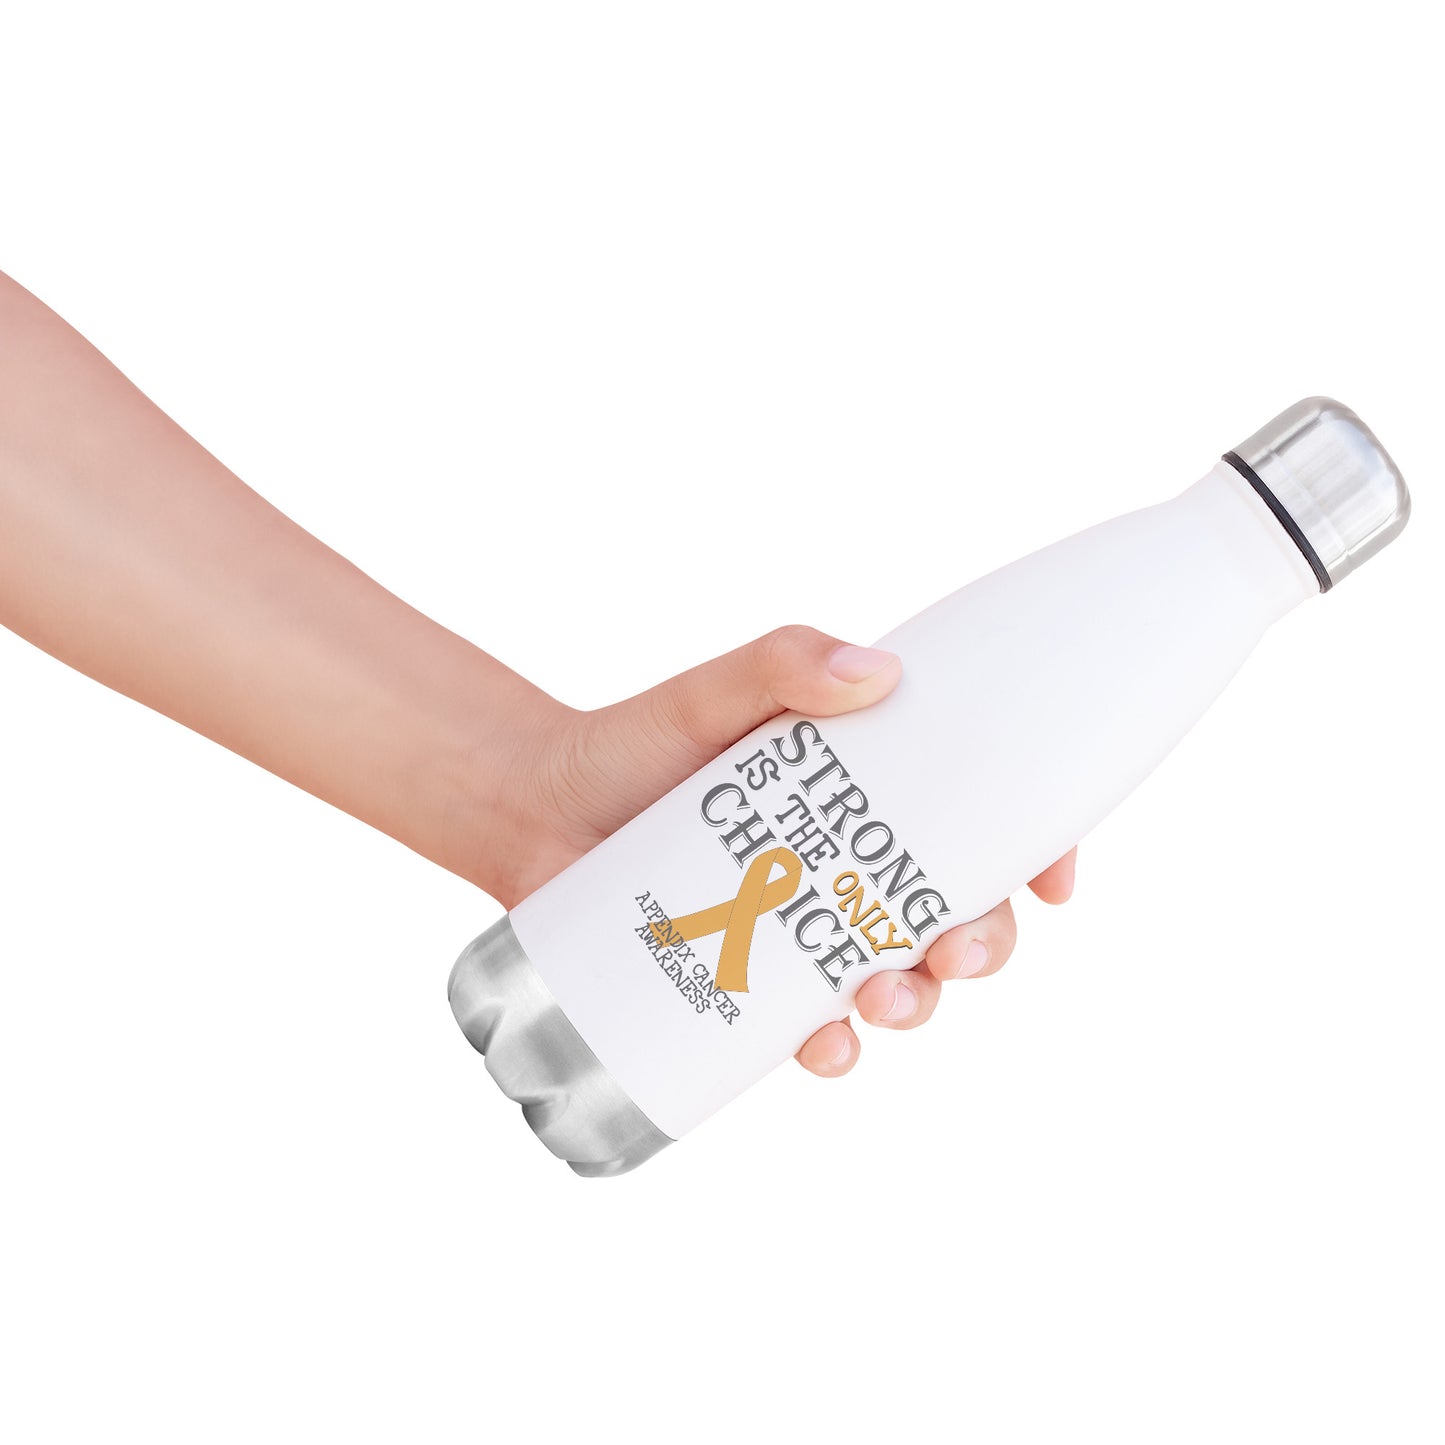 Strong is the Only Choice -Appendix Cancer Awareness 20oz Insulated Water Bottle